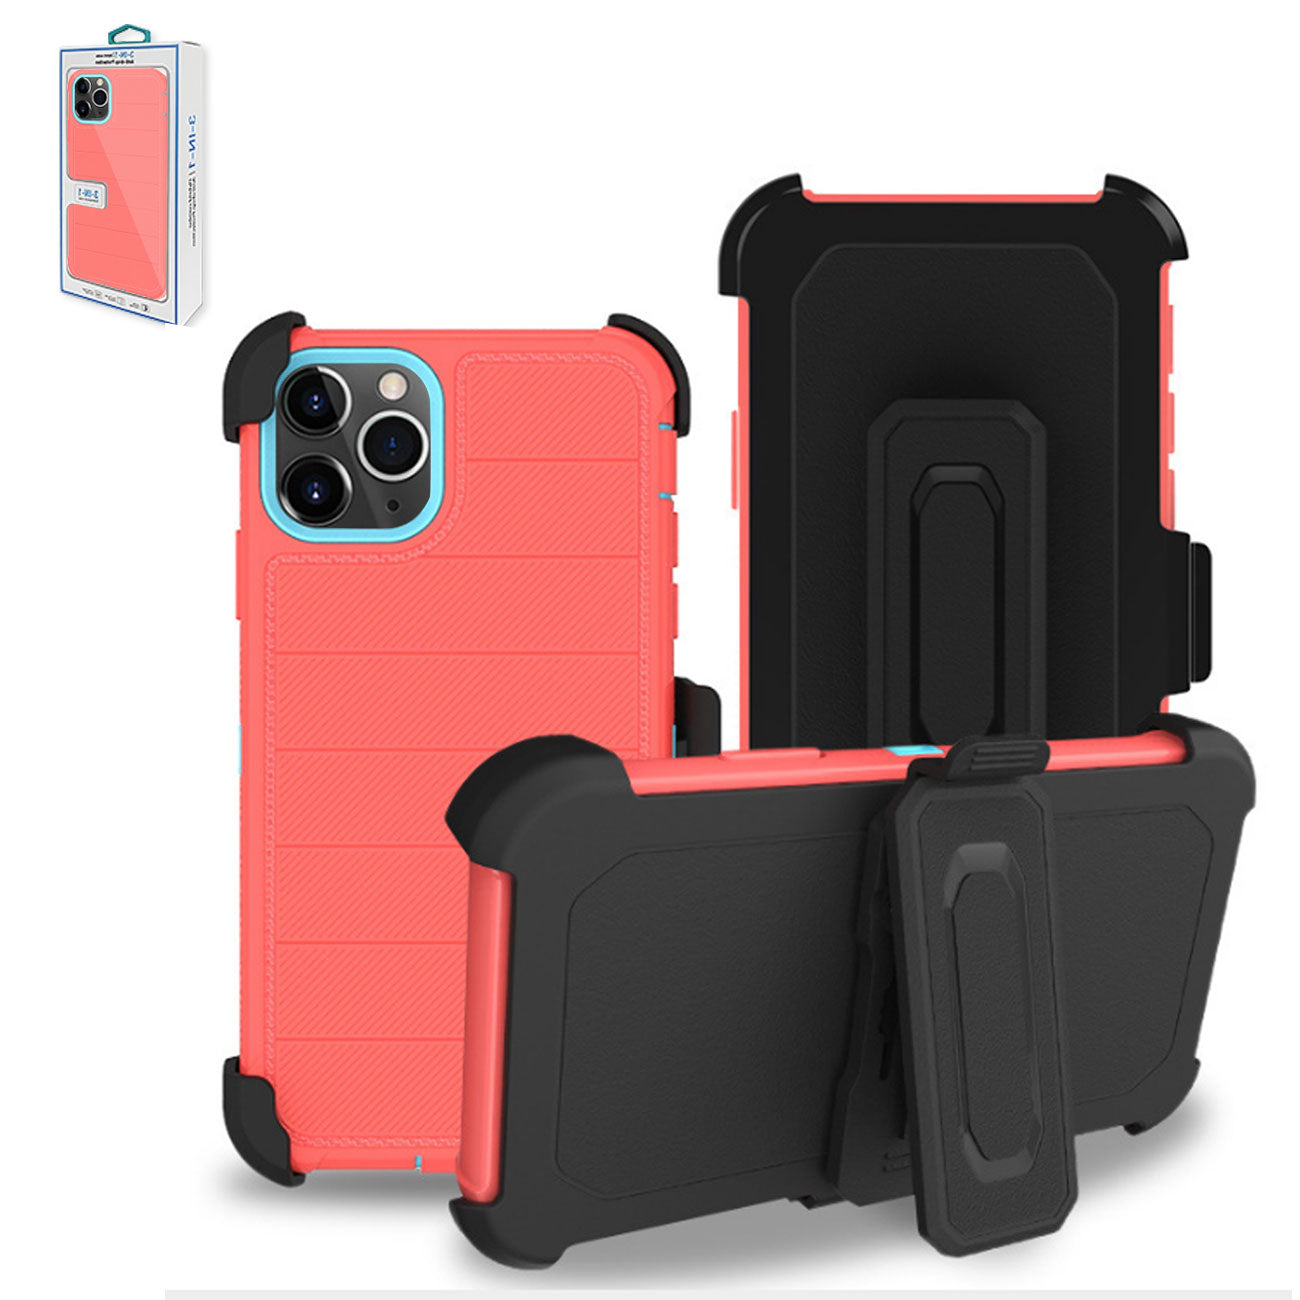 Case Holster Combo Hybrid 3-In-1 Heavy Duty Apple iPhone 11 Pro Max Red Color